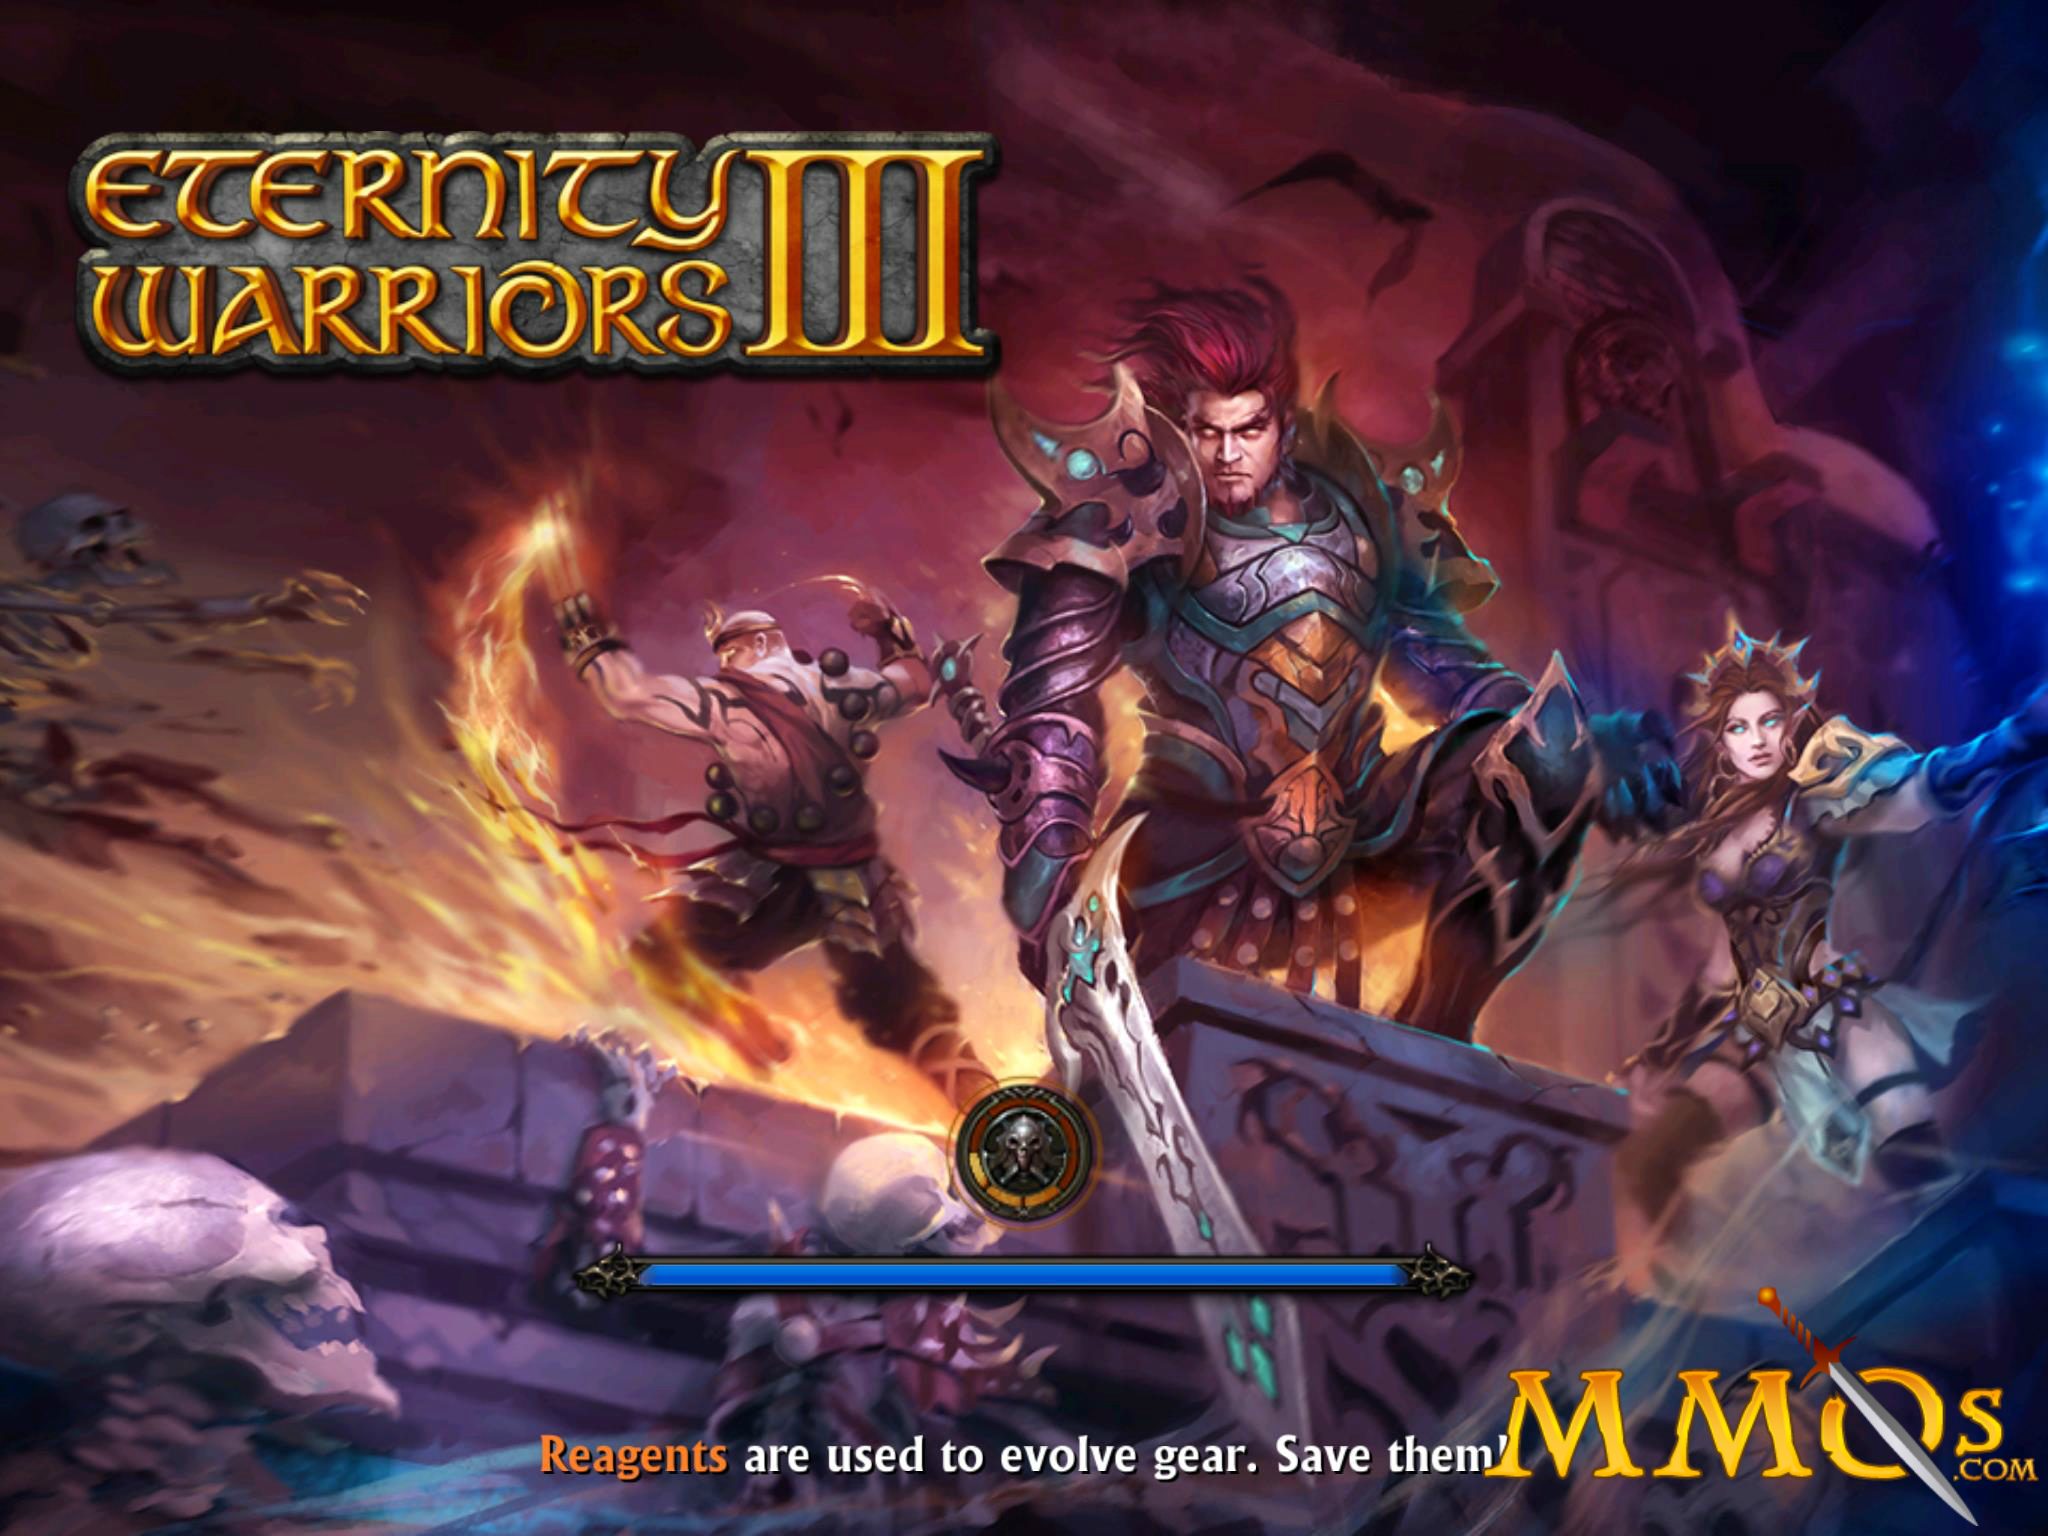 Eternity Warriors 3 Game Review 